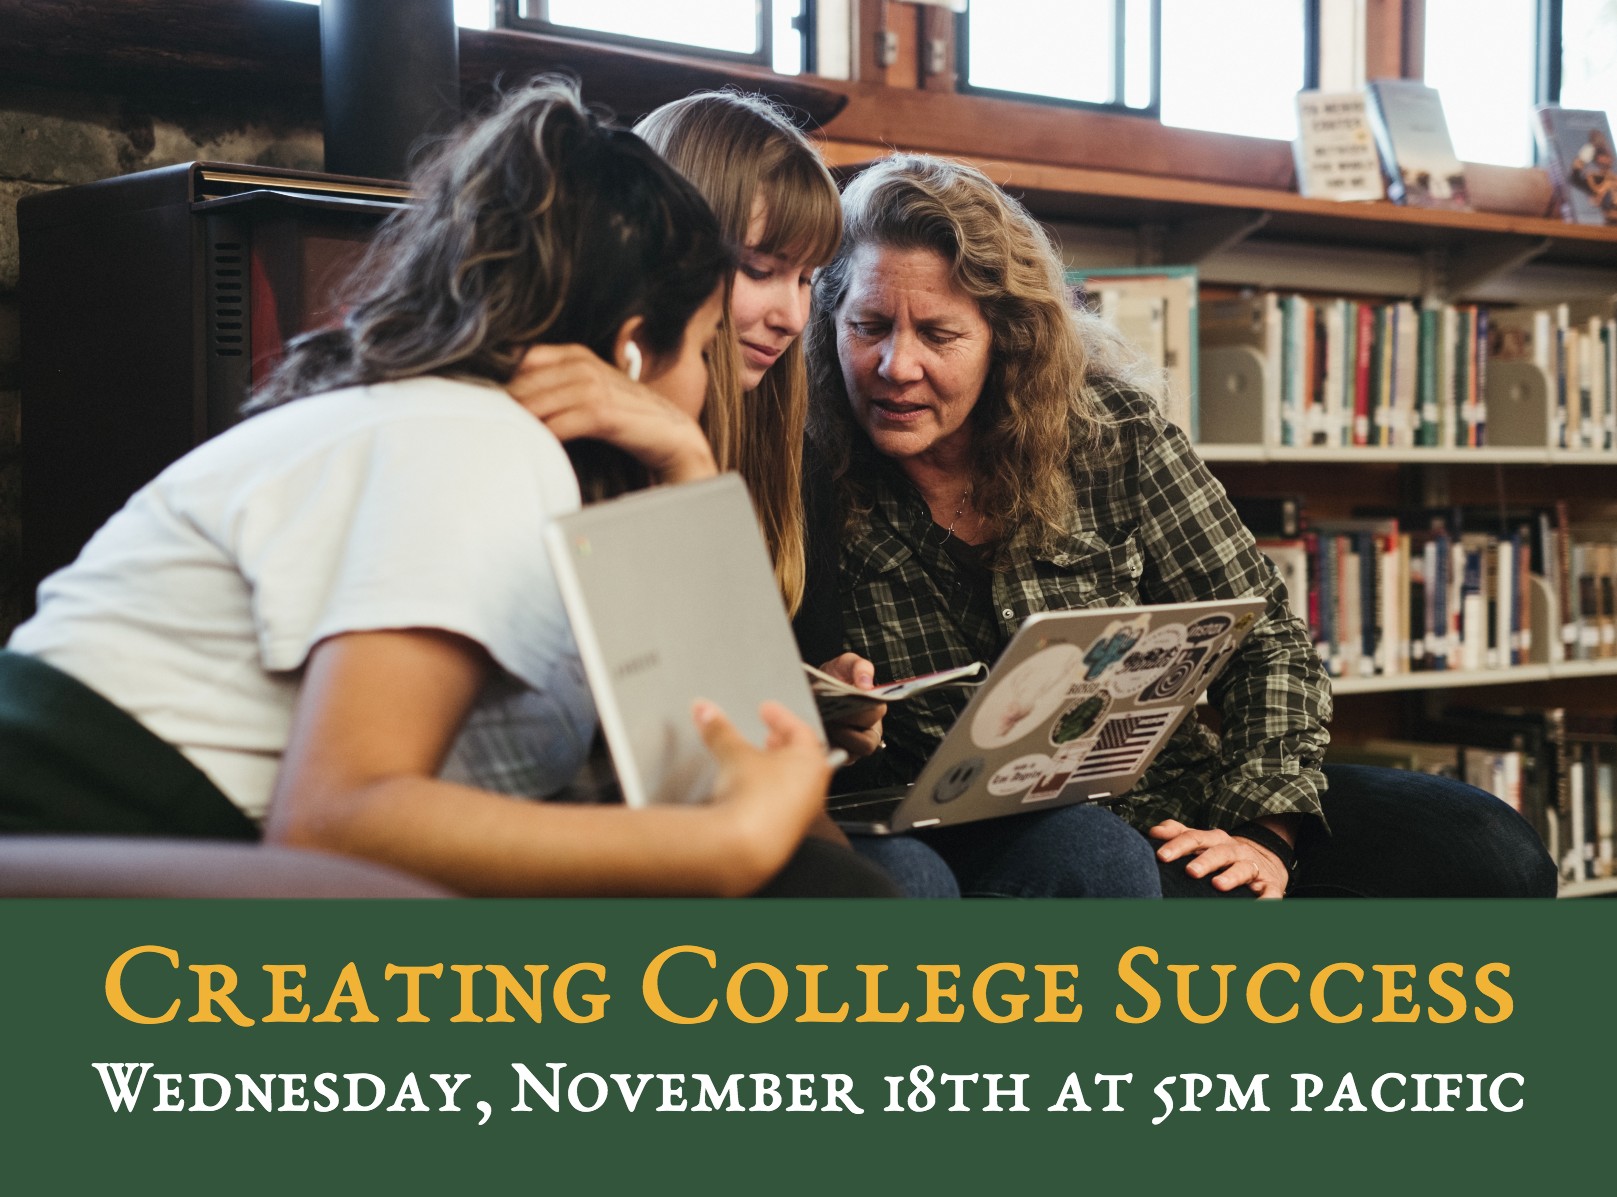 College Counseling! Wednesday, November 18th at 5pm Pacific Time